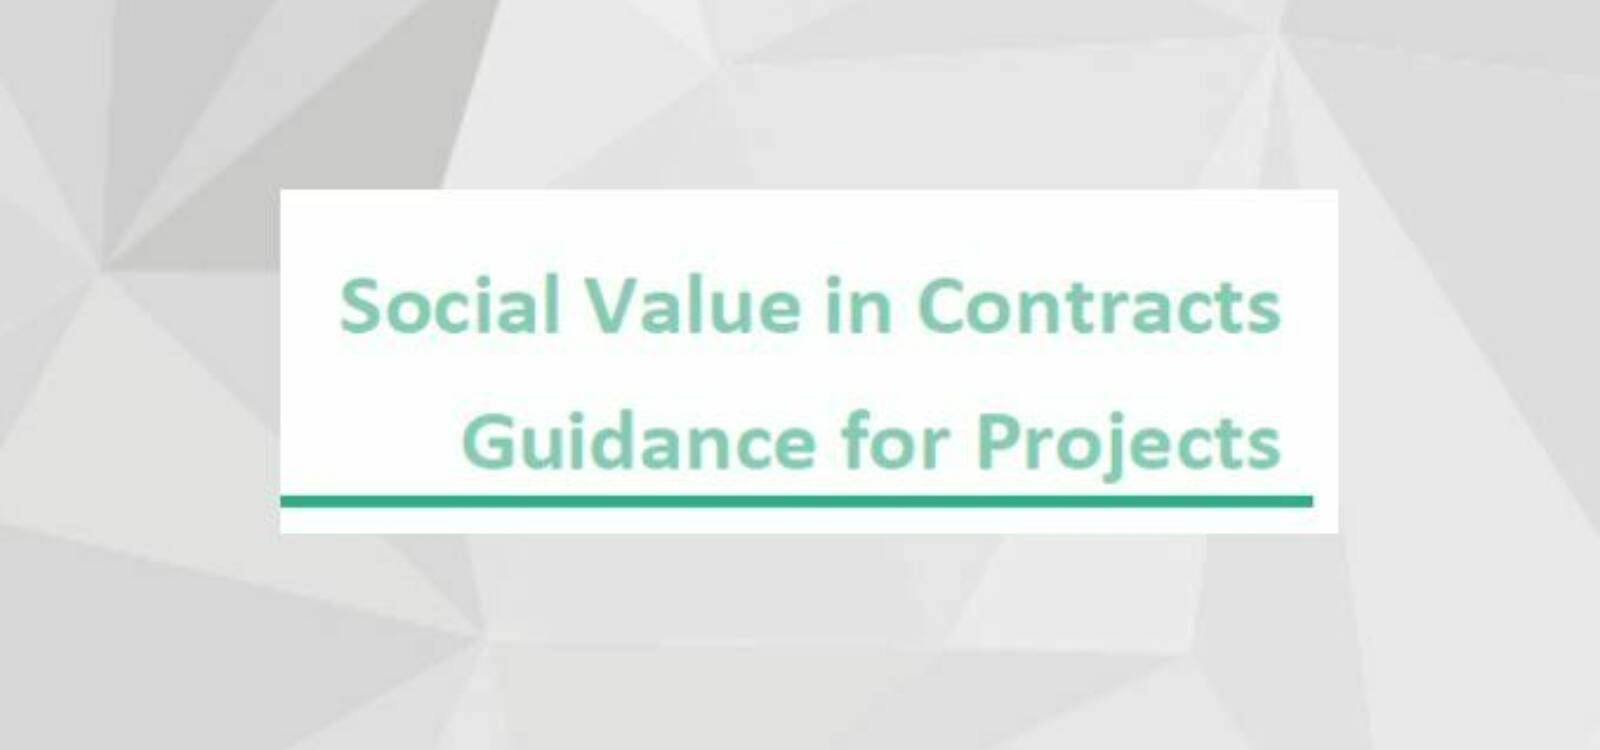 Guidance for Projects - Social Value in Contracts view publication